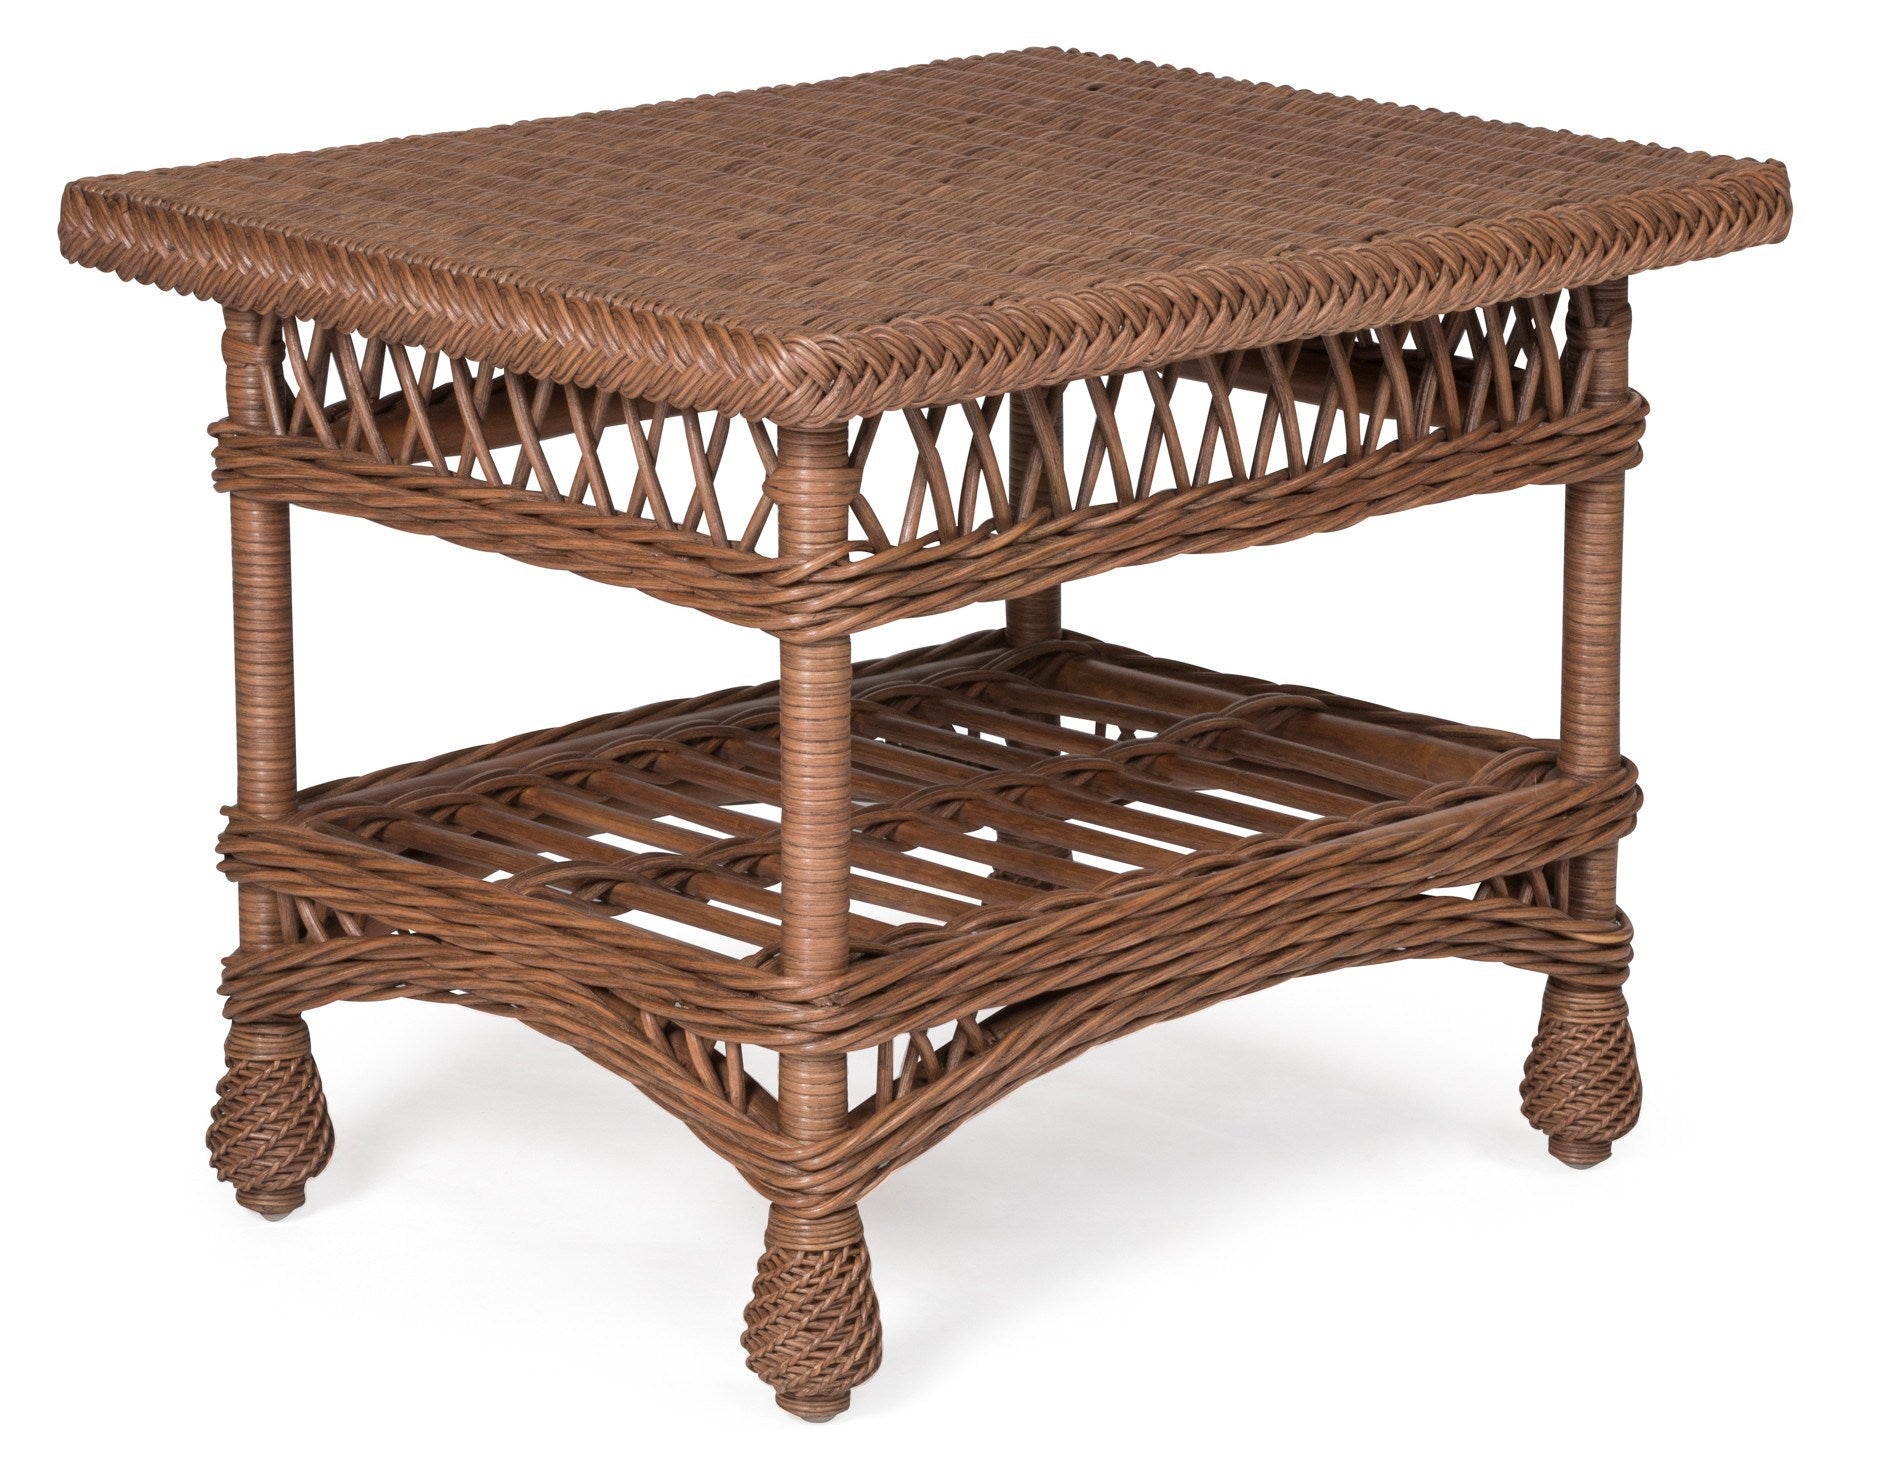 Designer Wicker & Rattan By Tribor Harbor Front Coffee Table by Designer Wicker from Tribor Coffee Table - Rattan Imports